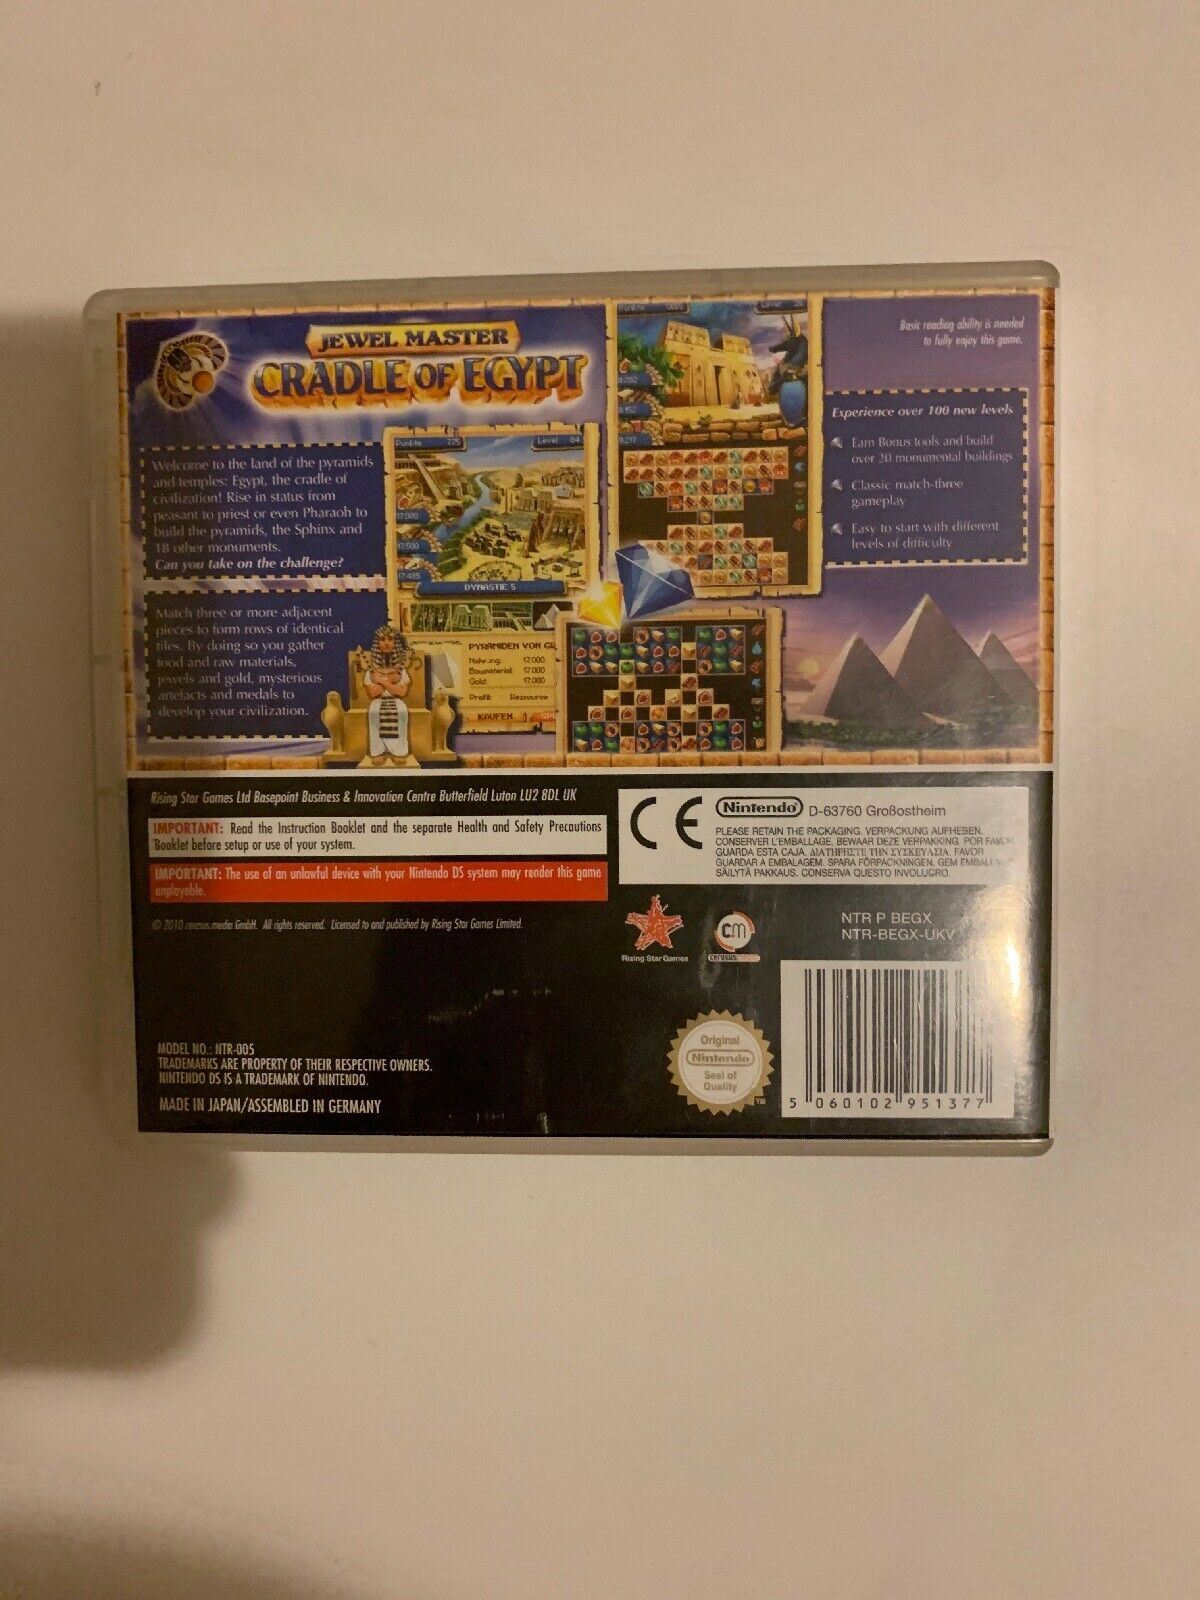 Jewel Master: Cradle of Egypt - Nintendo DS Game with Manual